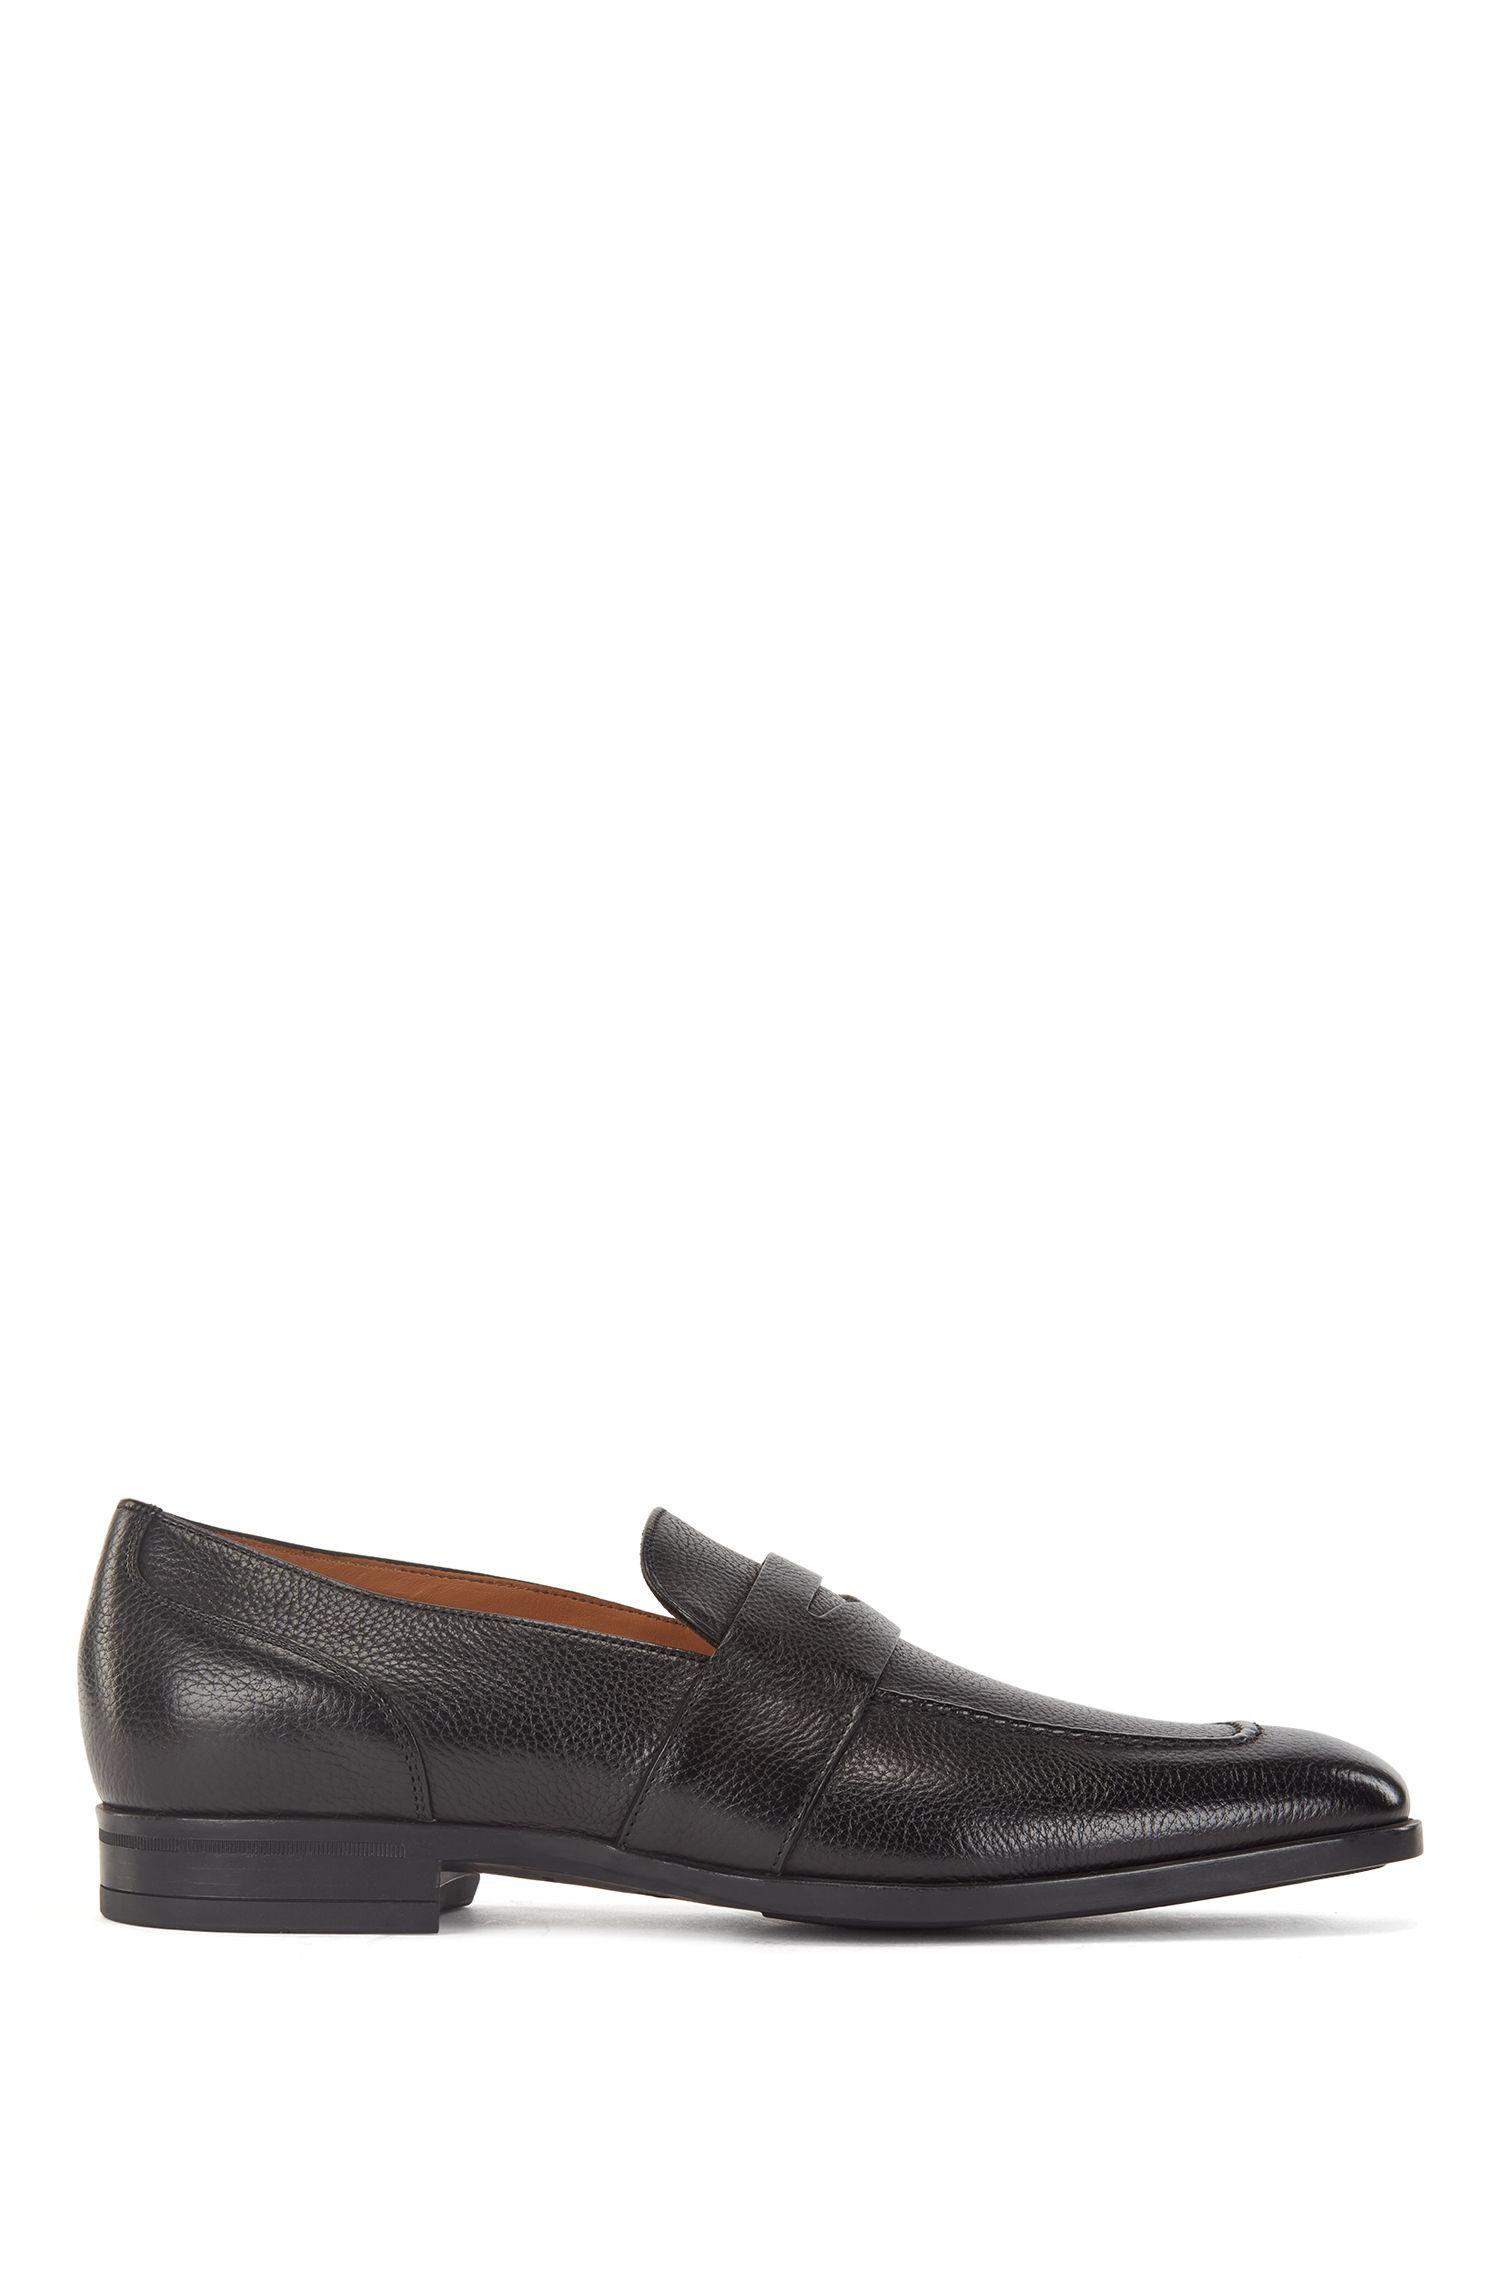 BOSS by Hugo Boss Italian Made Loafers In Grained Leather With Penny ...